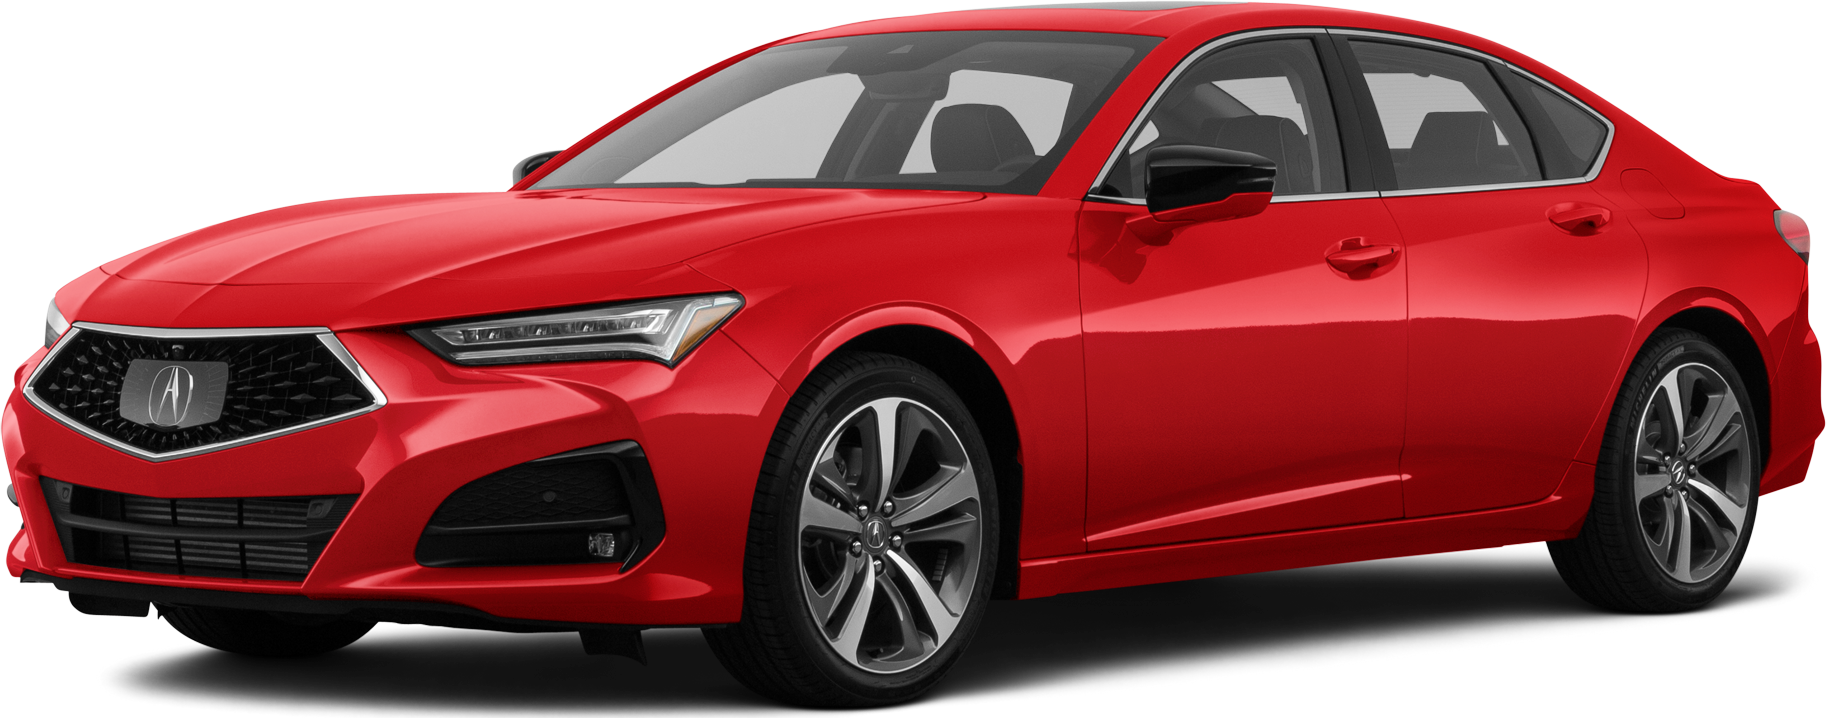 2021 Acura TLX Reviews, Pricing & Specs | Kelley Blue Book
